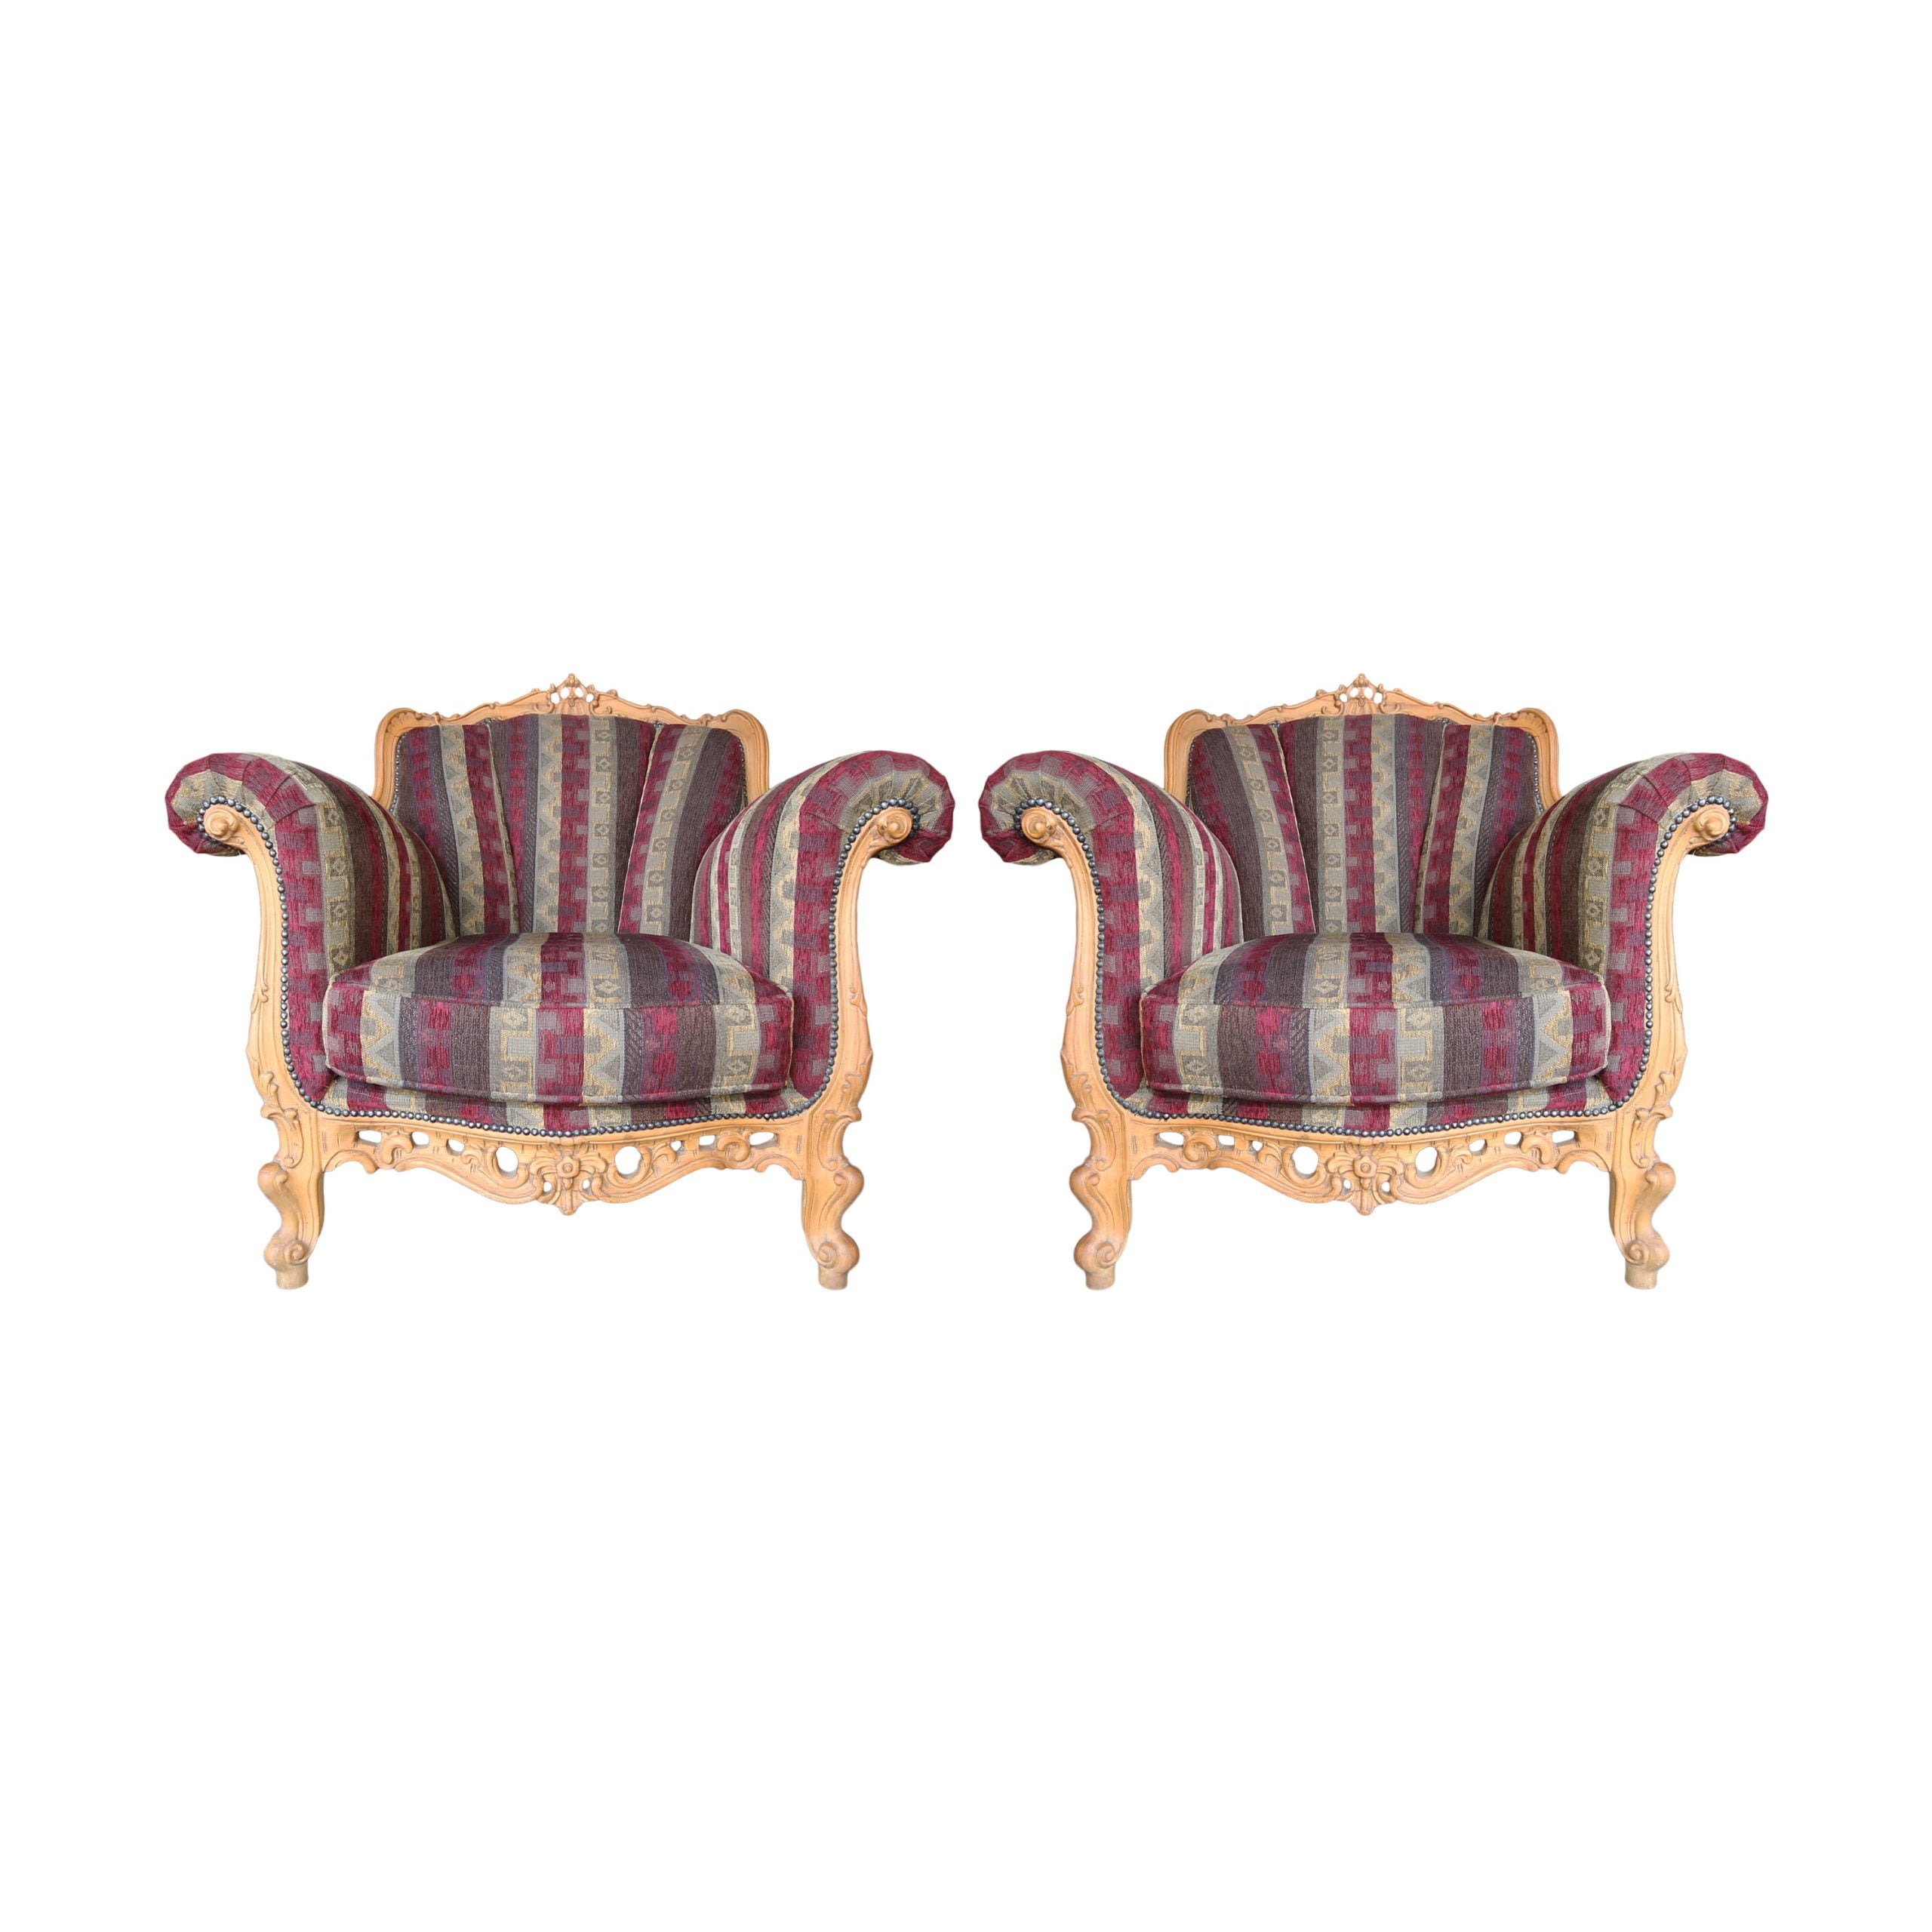 20th century french arm chairs